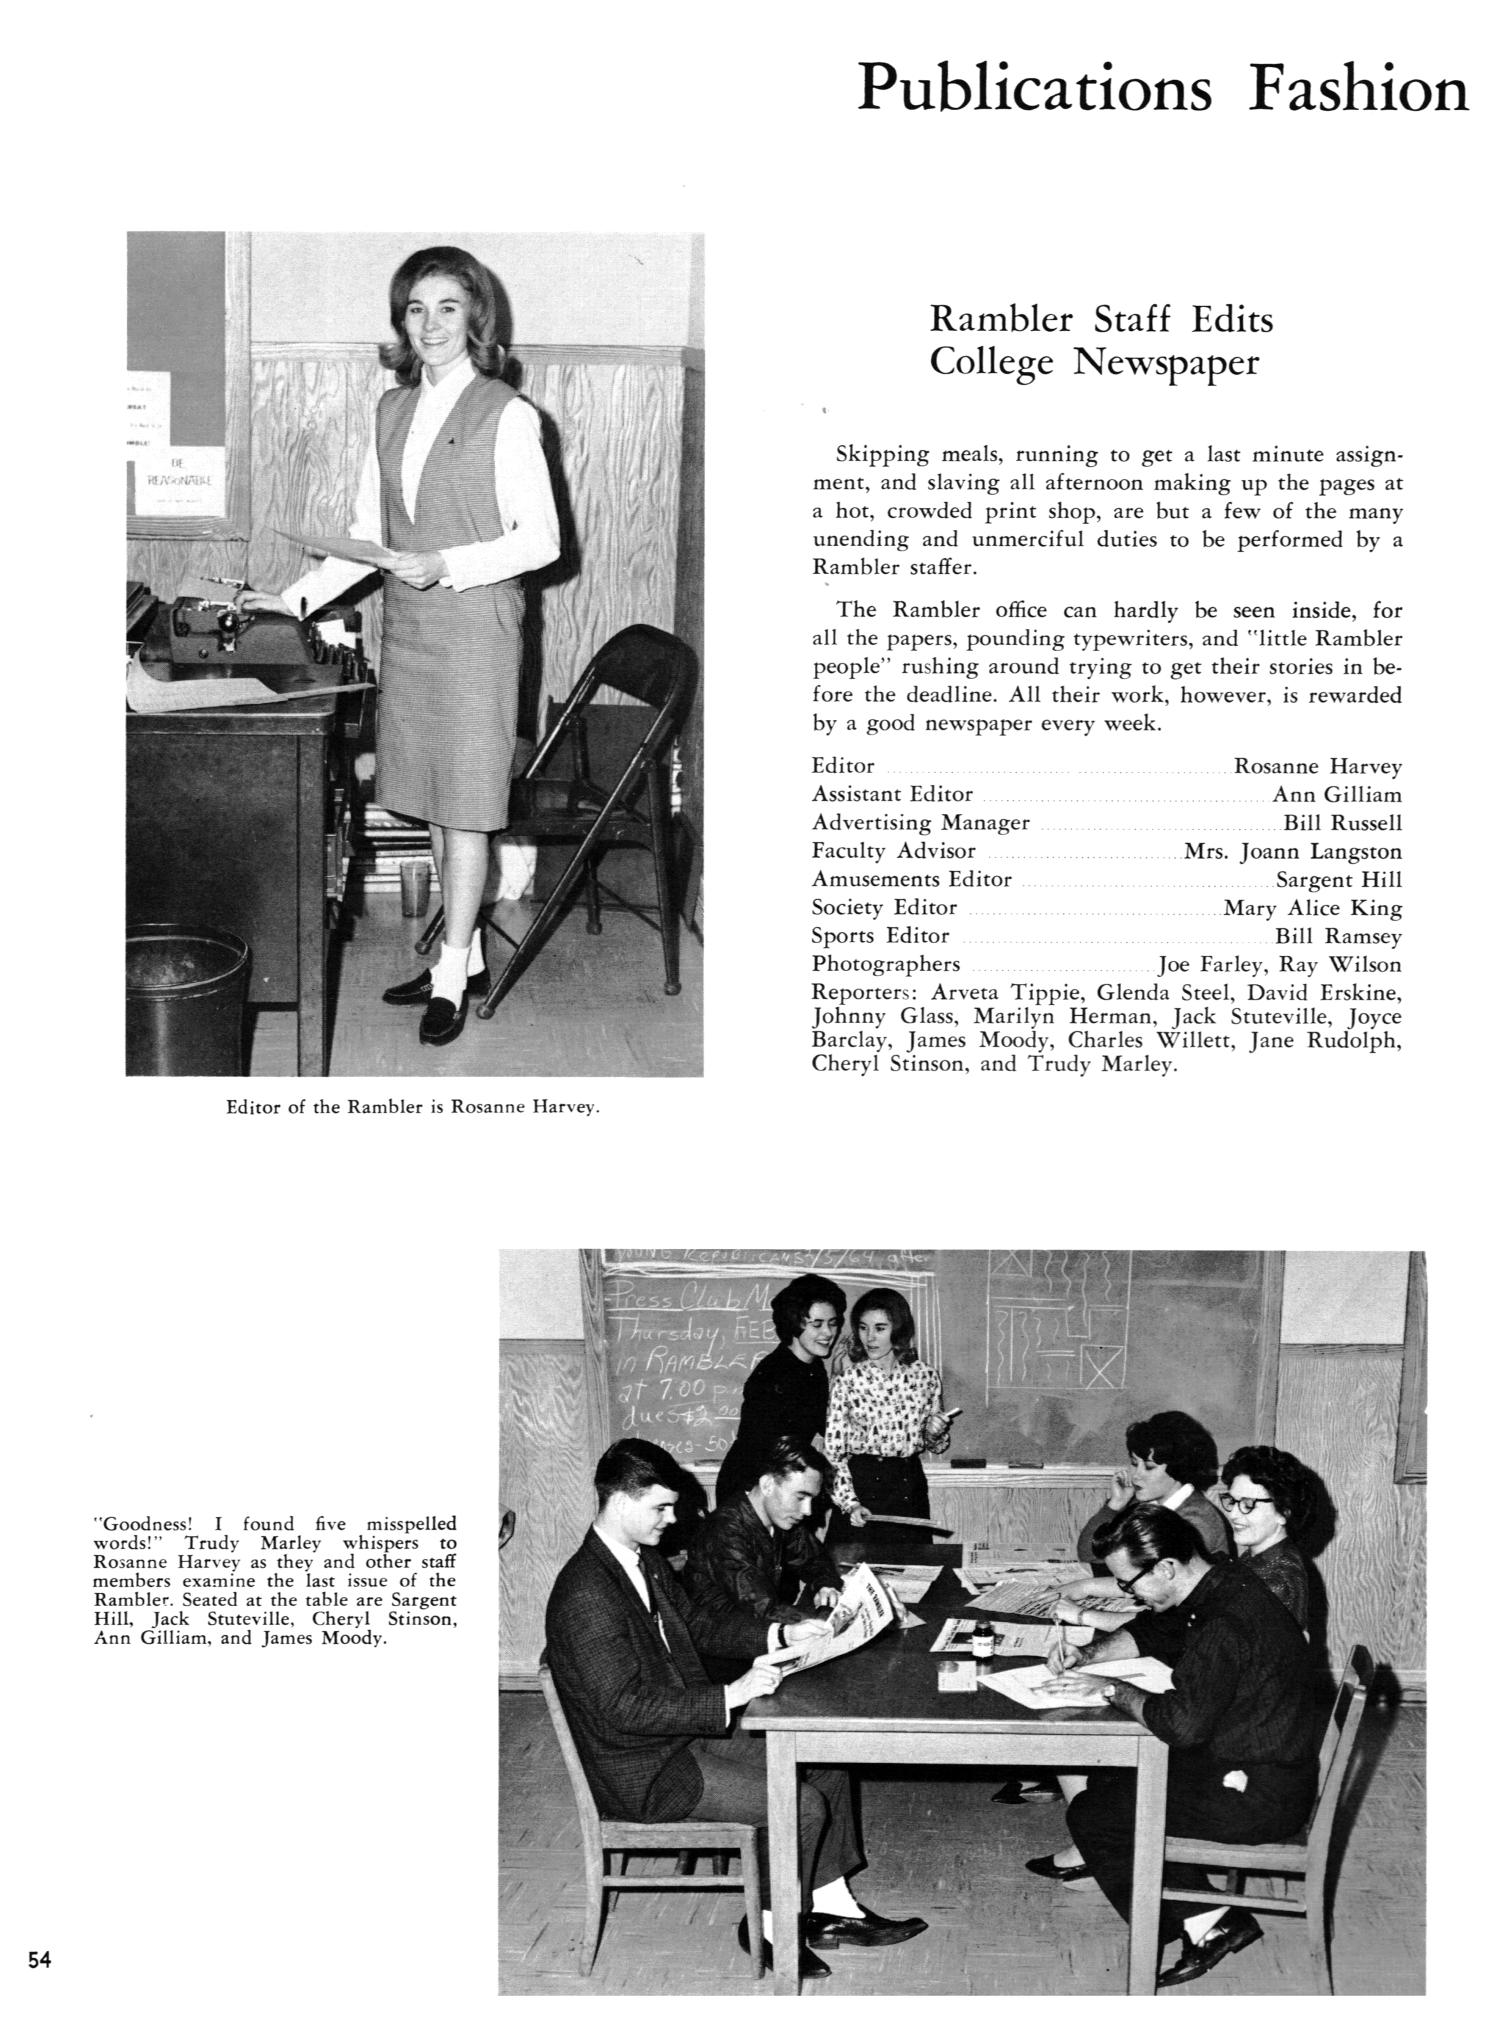 TXWECO, Yearbook Of Texas Wesleyan College, 1964 - Page 54 - The.